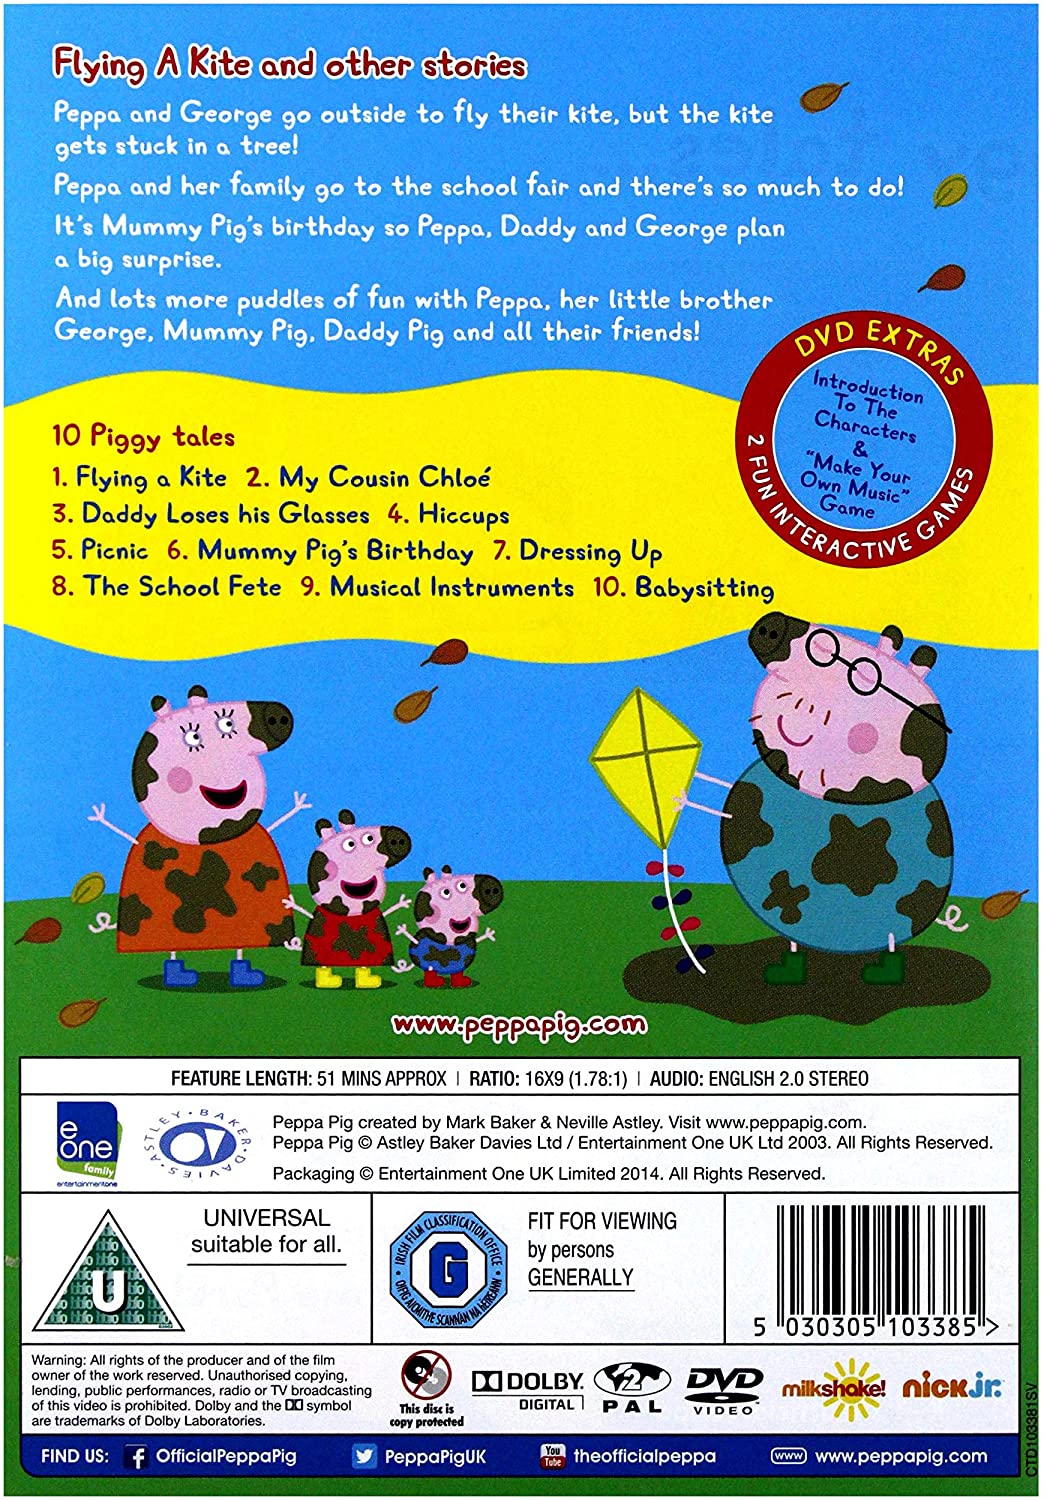 Peppa Pig: Flying a Kite and Other Stories [Volume 2]